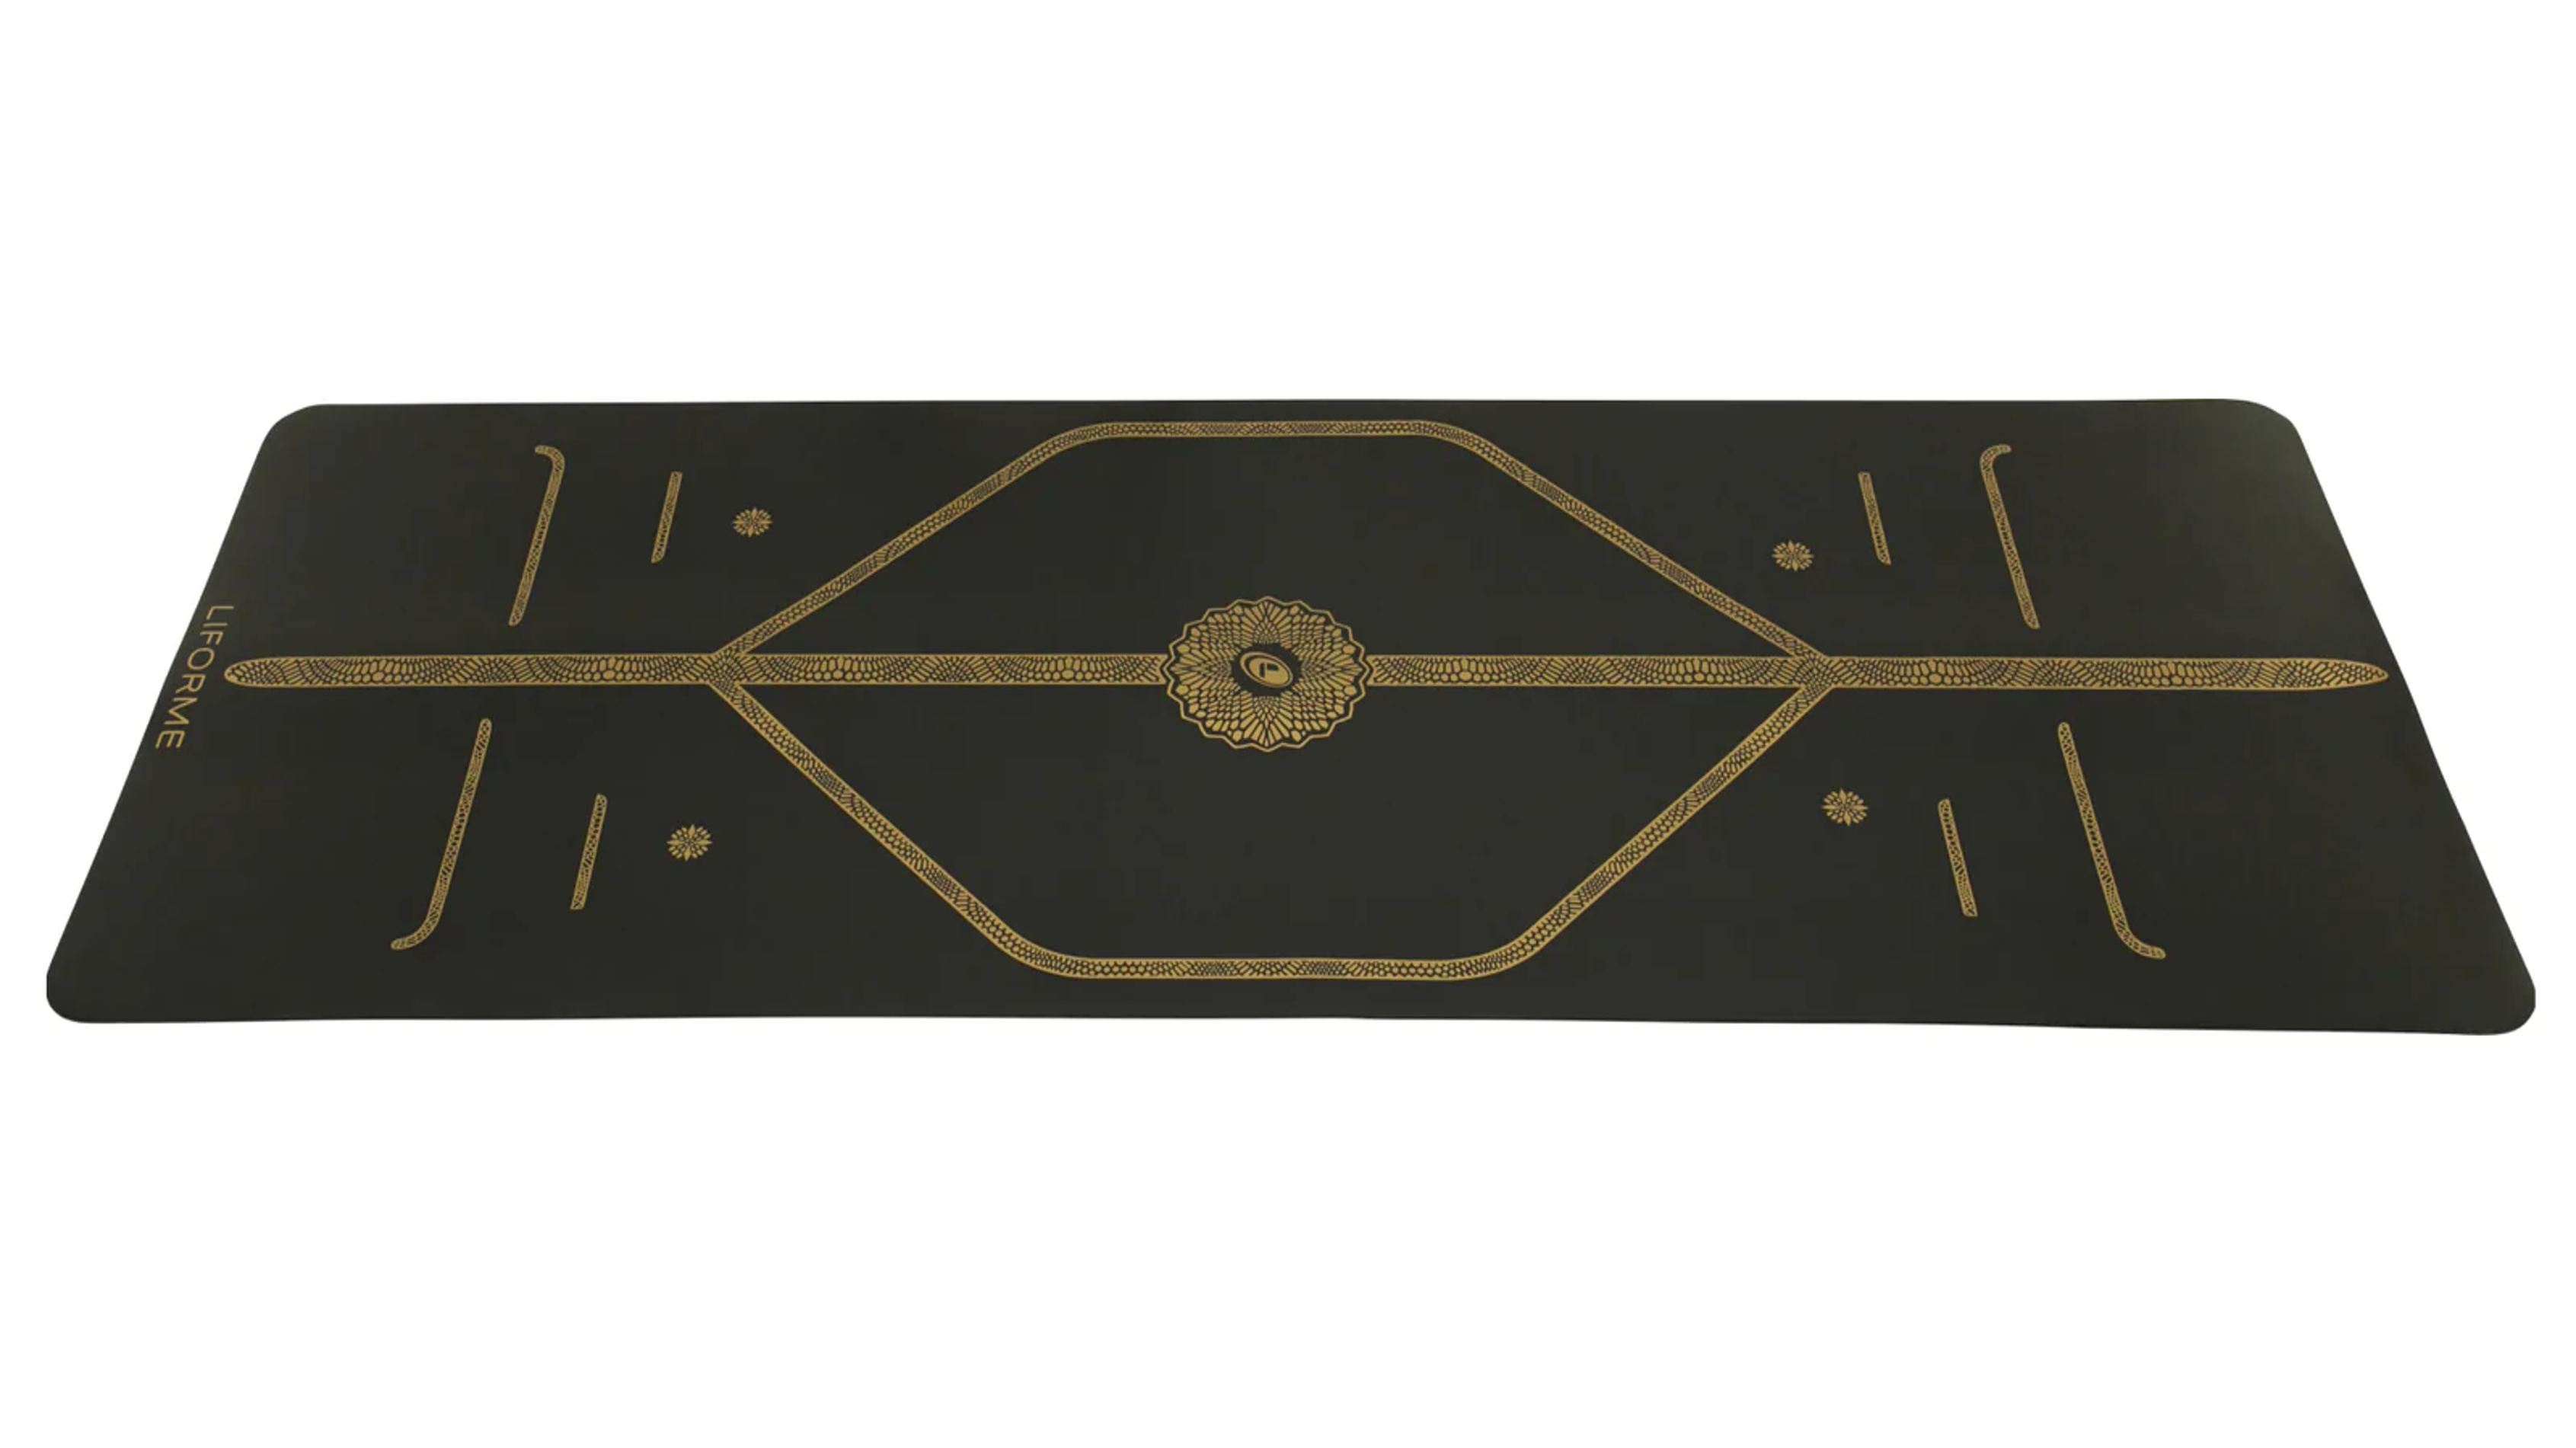 Elevate Your Practice with the Liforme Black & Gold Yoga Mat